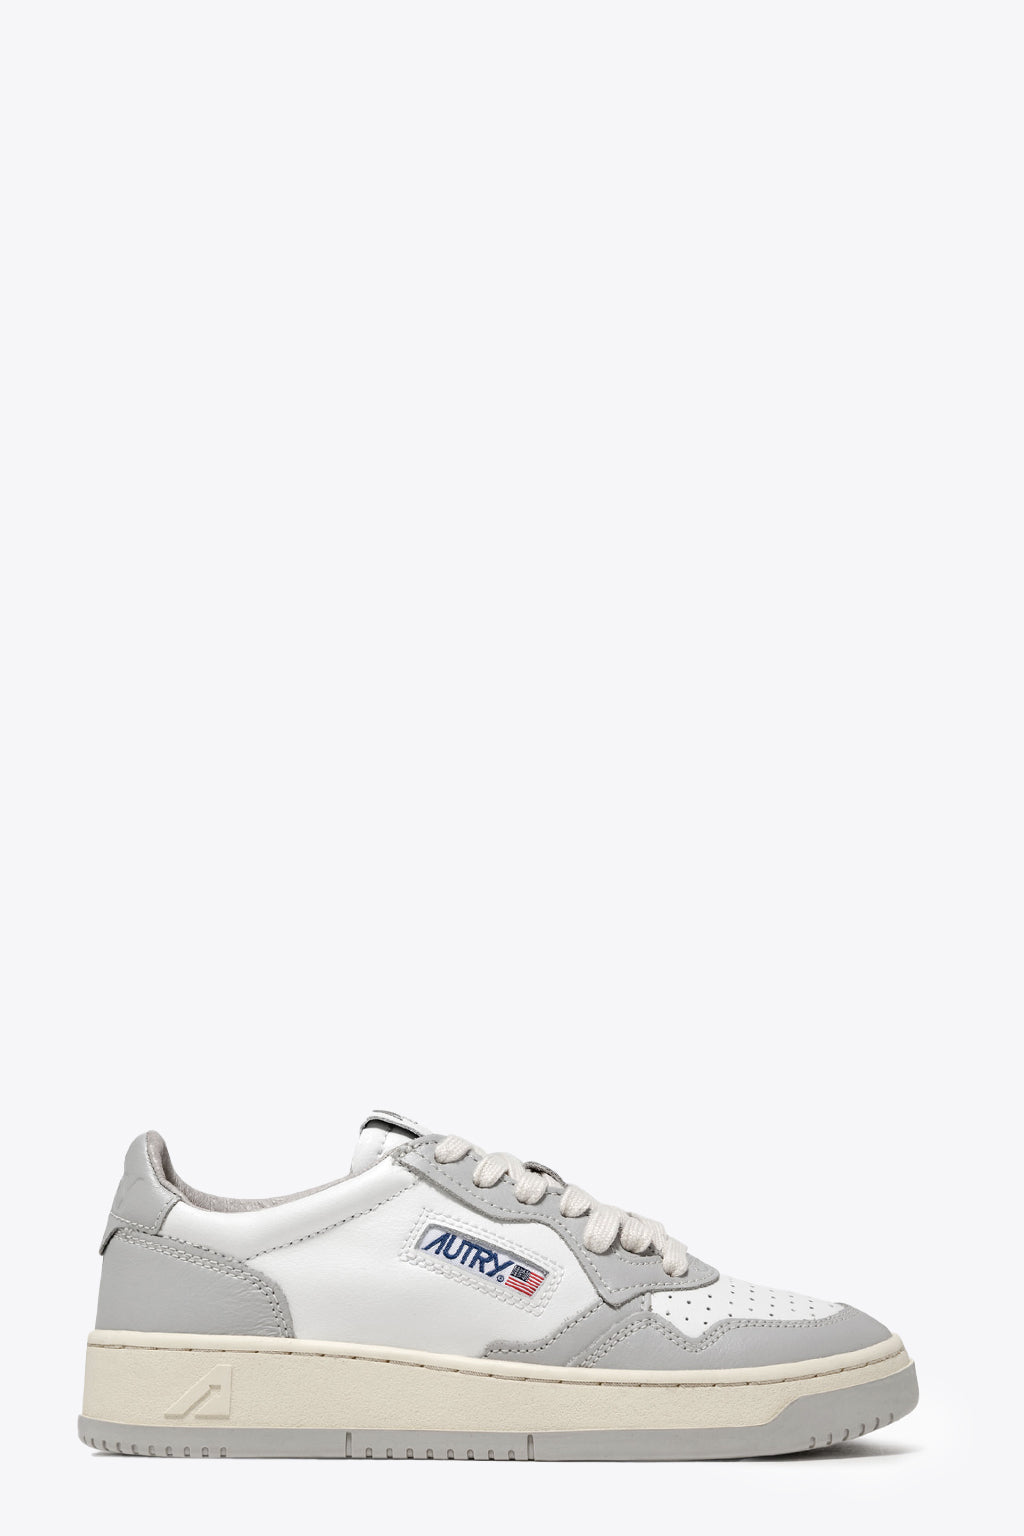 alt-image__Grey-and-white-leather-low-sneaker---Medalist